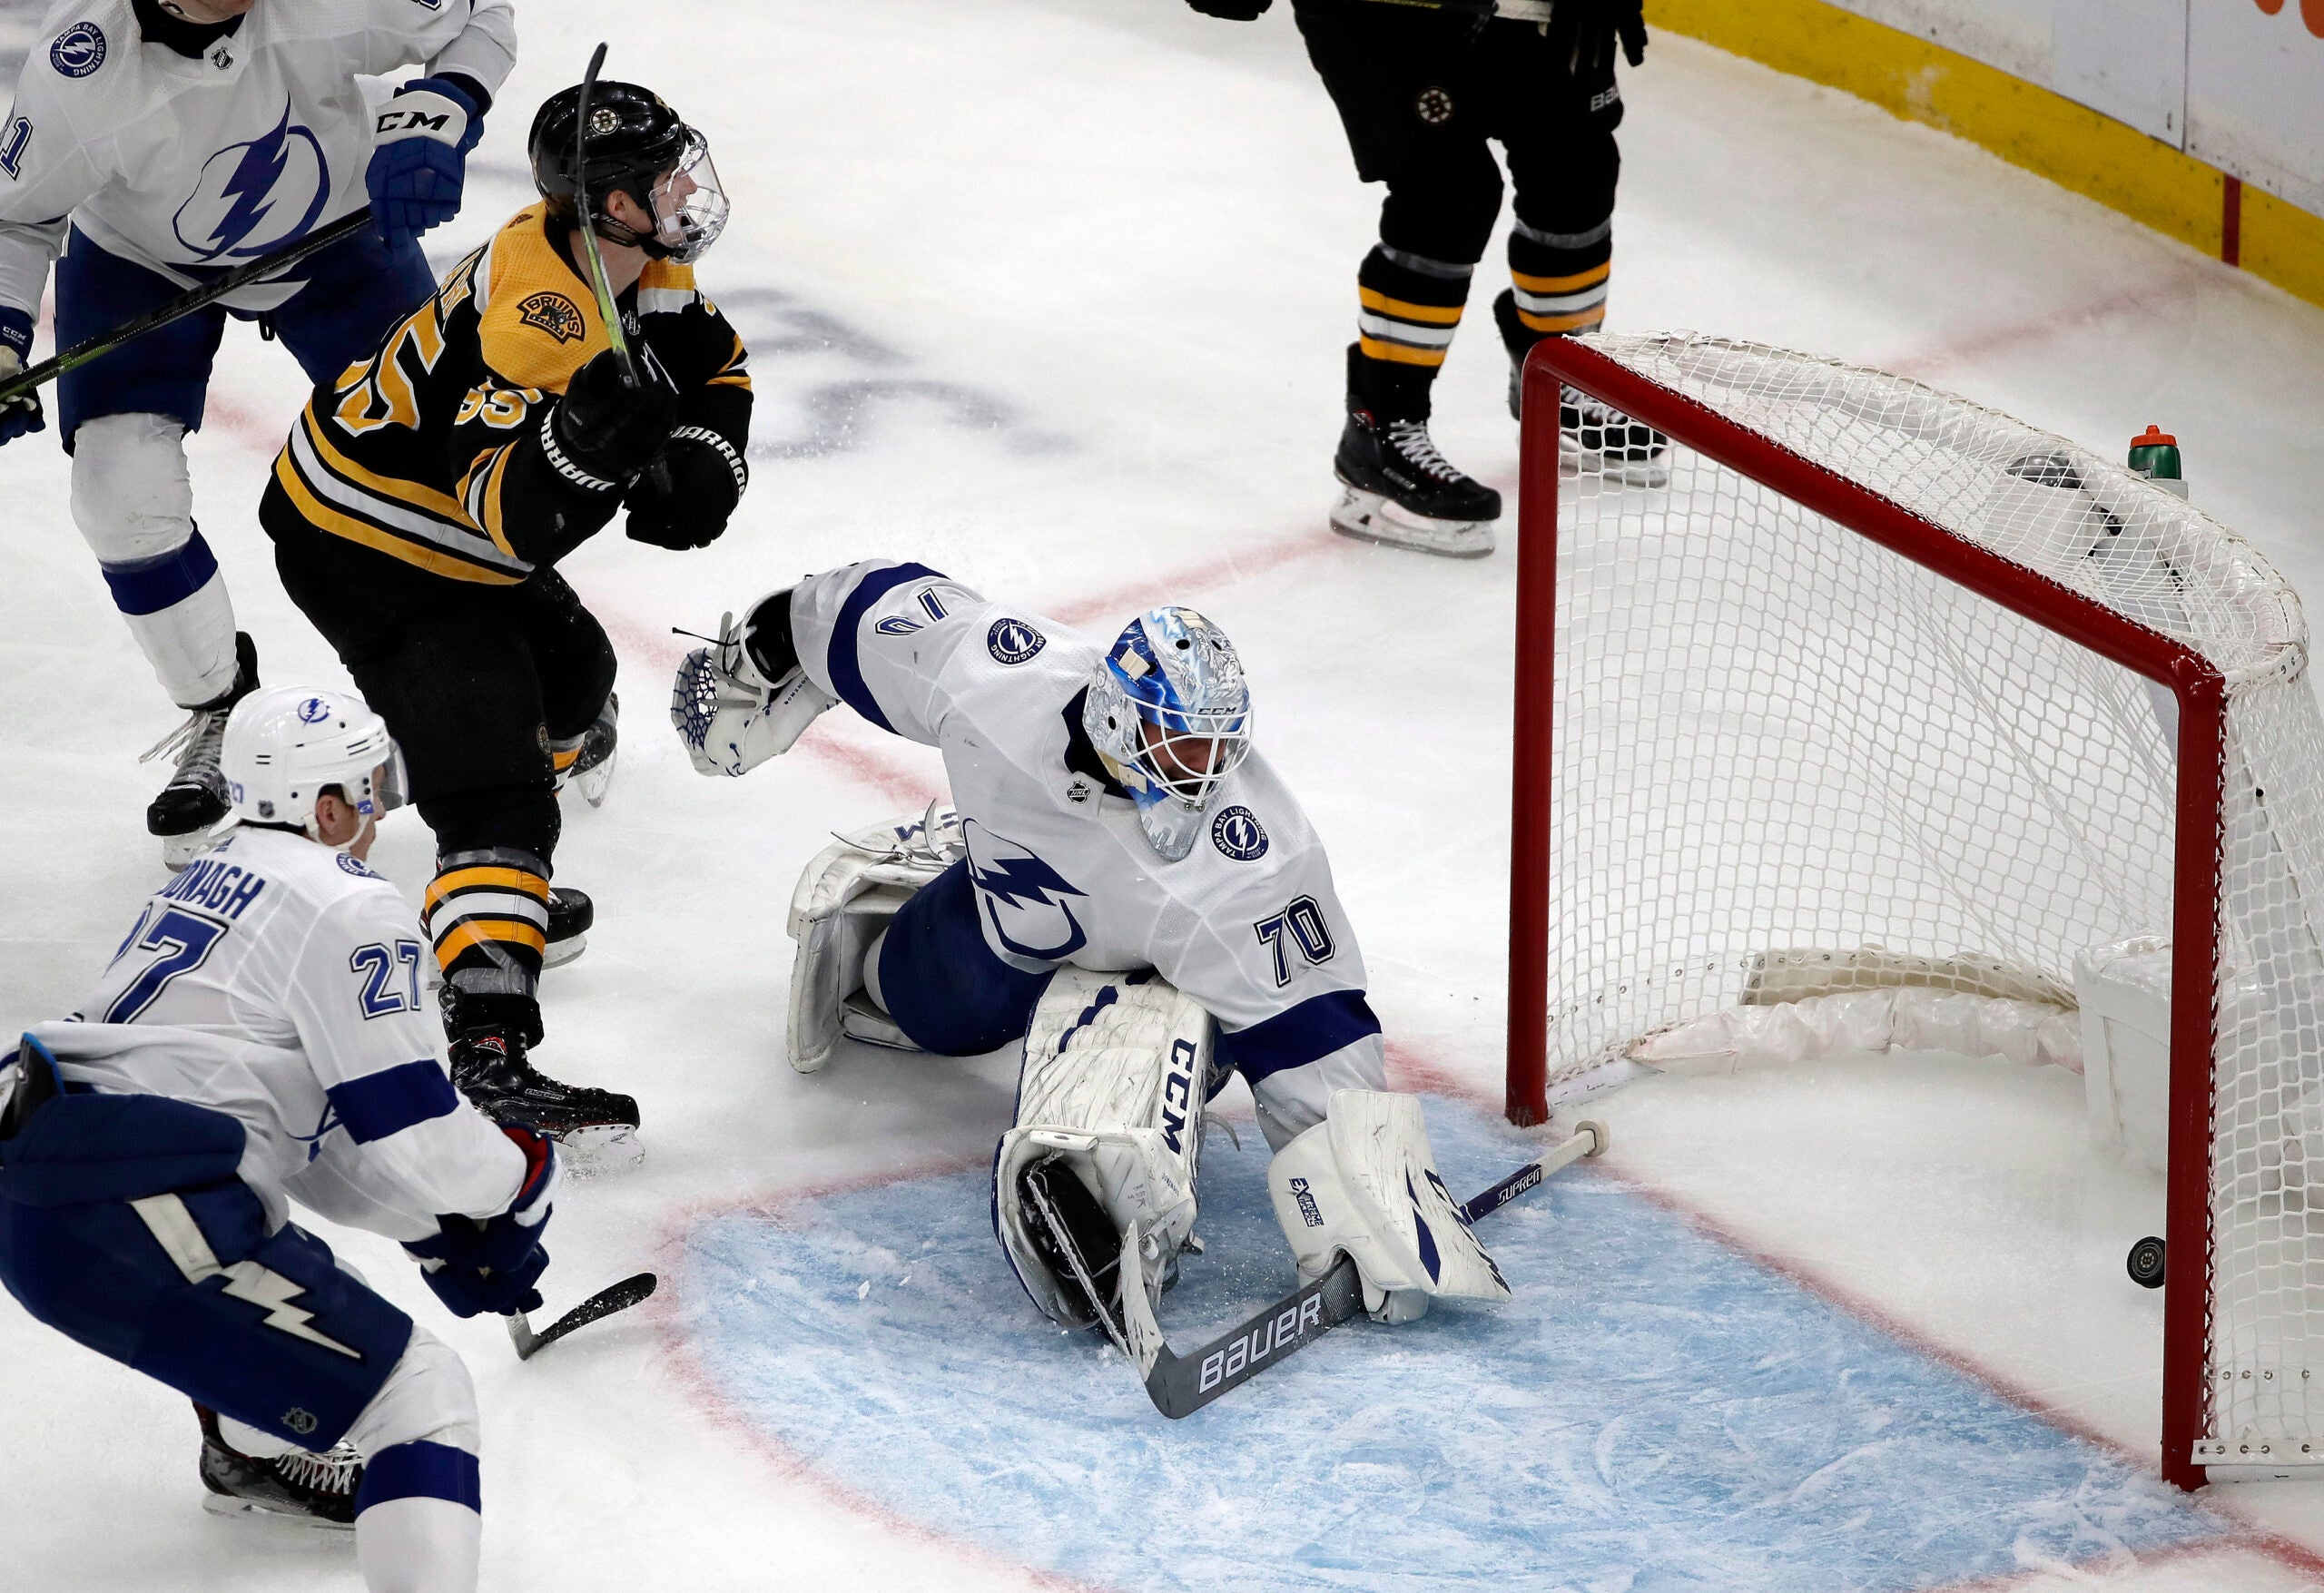 Torey Krug's overtime goal delivers a statement victory for the Bruins -  The Boston Globe